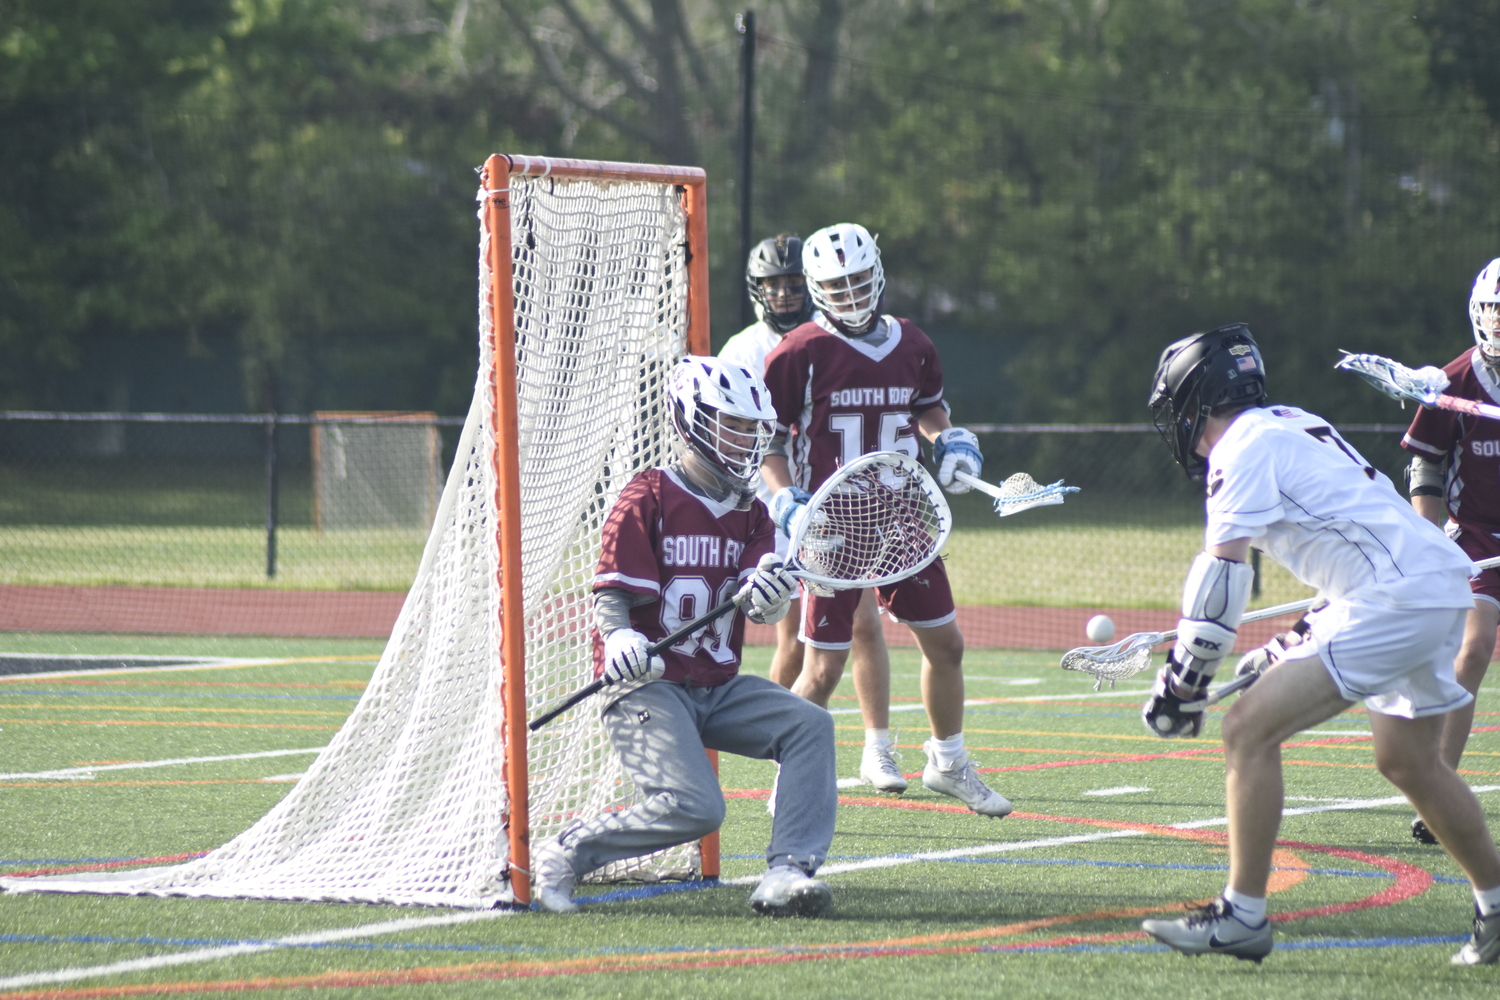 Southampton sophomore goalie Oliver Edson tracks the ball in front of his goal crease.   DREW BUDD